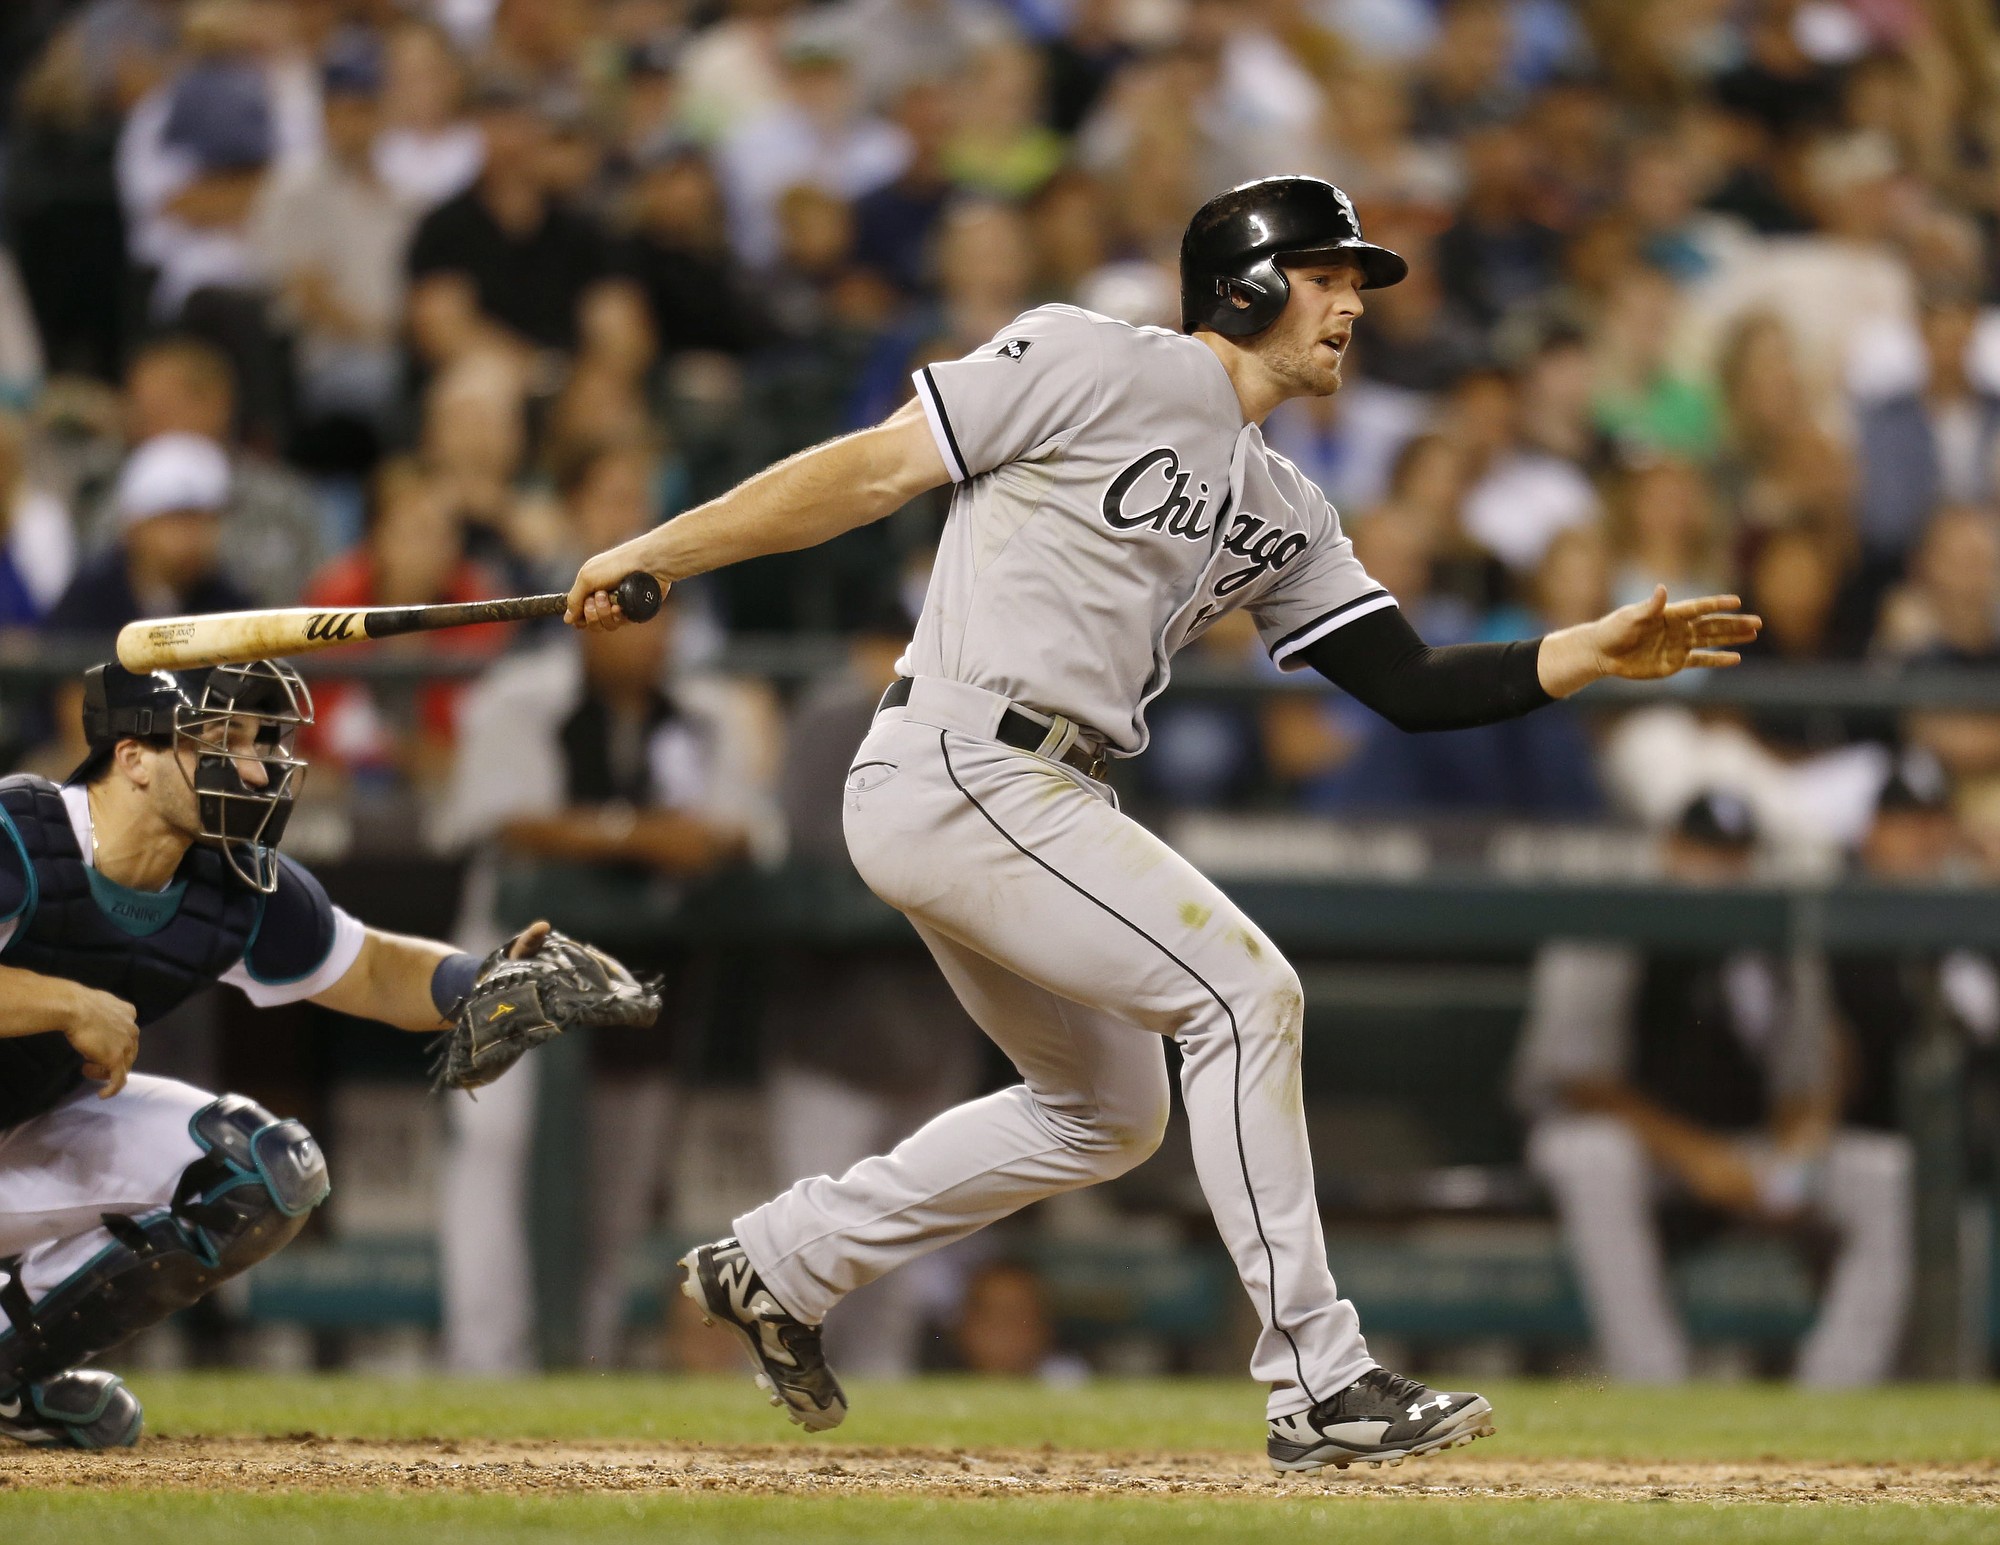 Chicago White Sox's Conor Gillaspie watches his RBI single against the Seattle Mariners during the 10th inning of a baseball game in Seattle on Saturday, Aug. 9, 2014.